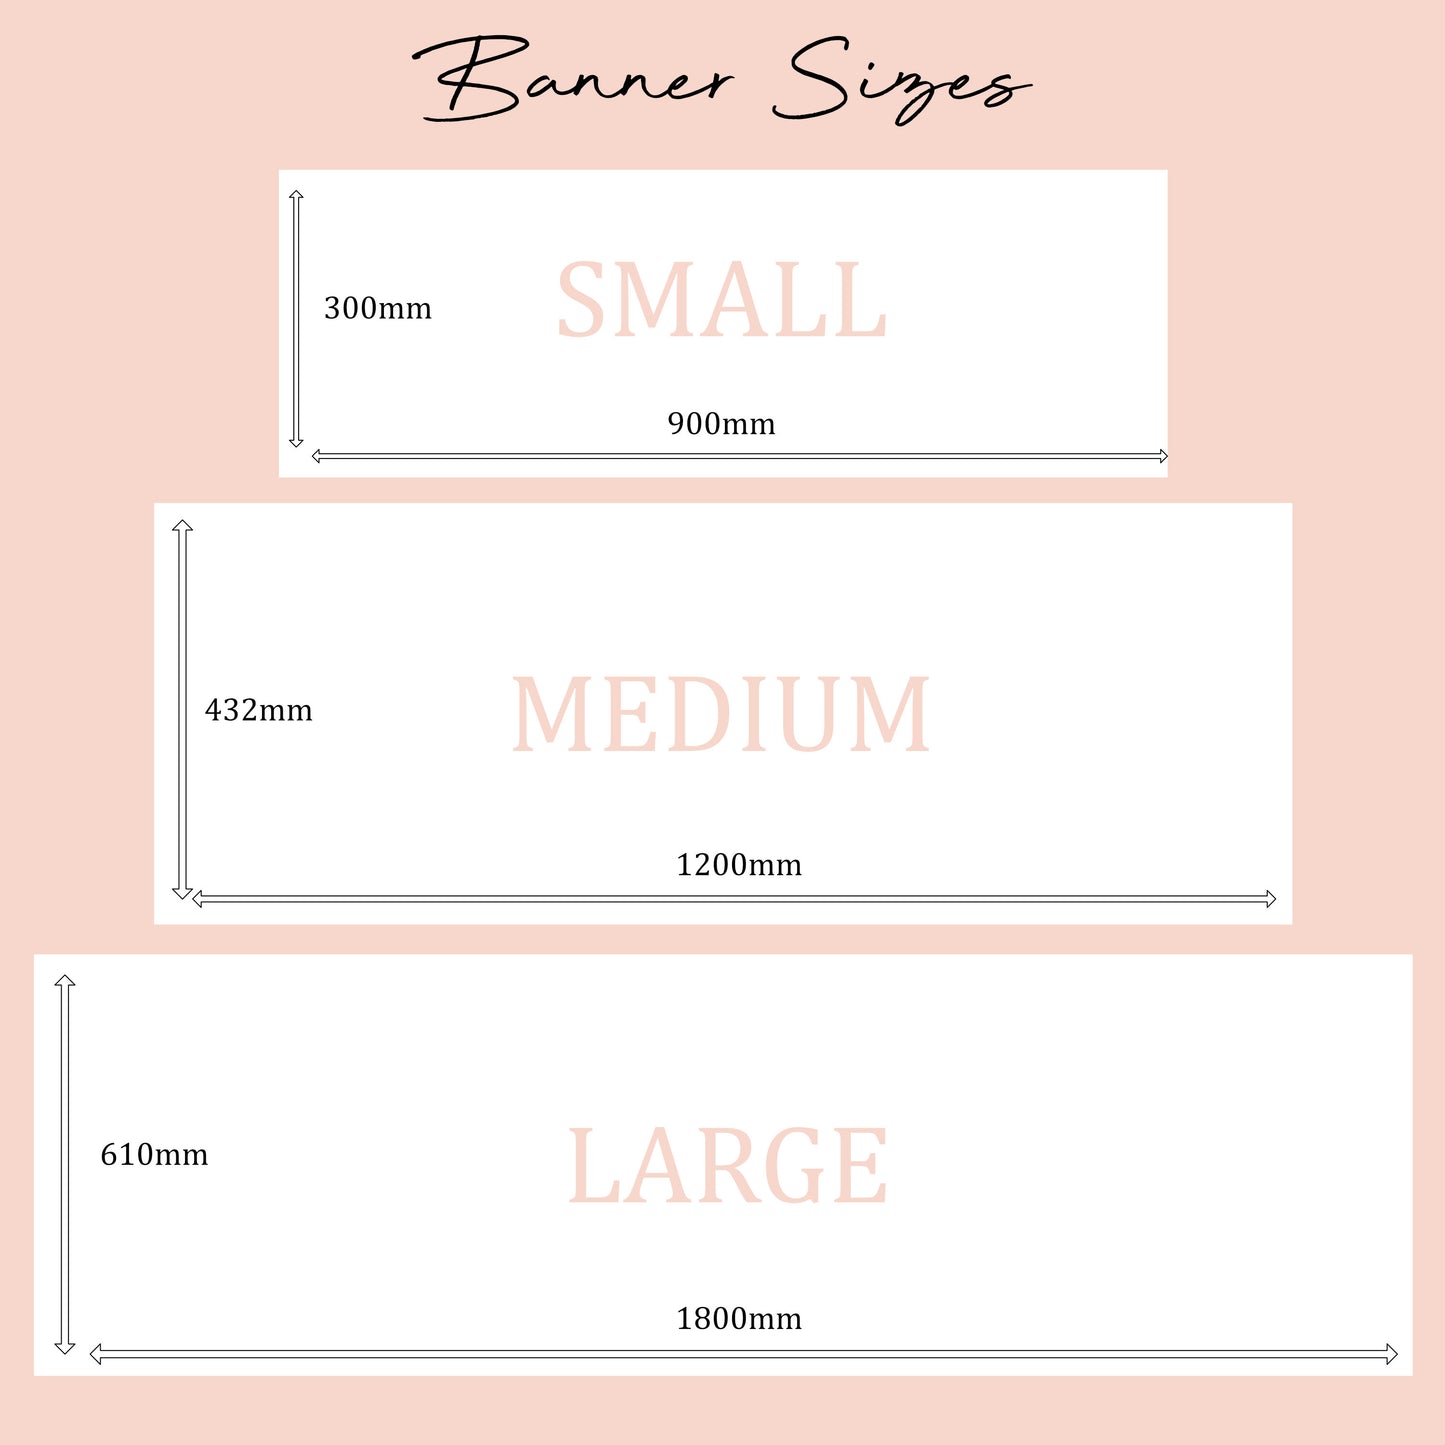 Personalised Baby Shower Party Banner, Watercolour Elephant Pink Girl